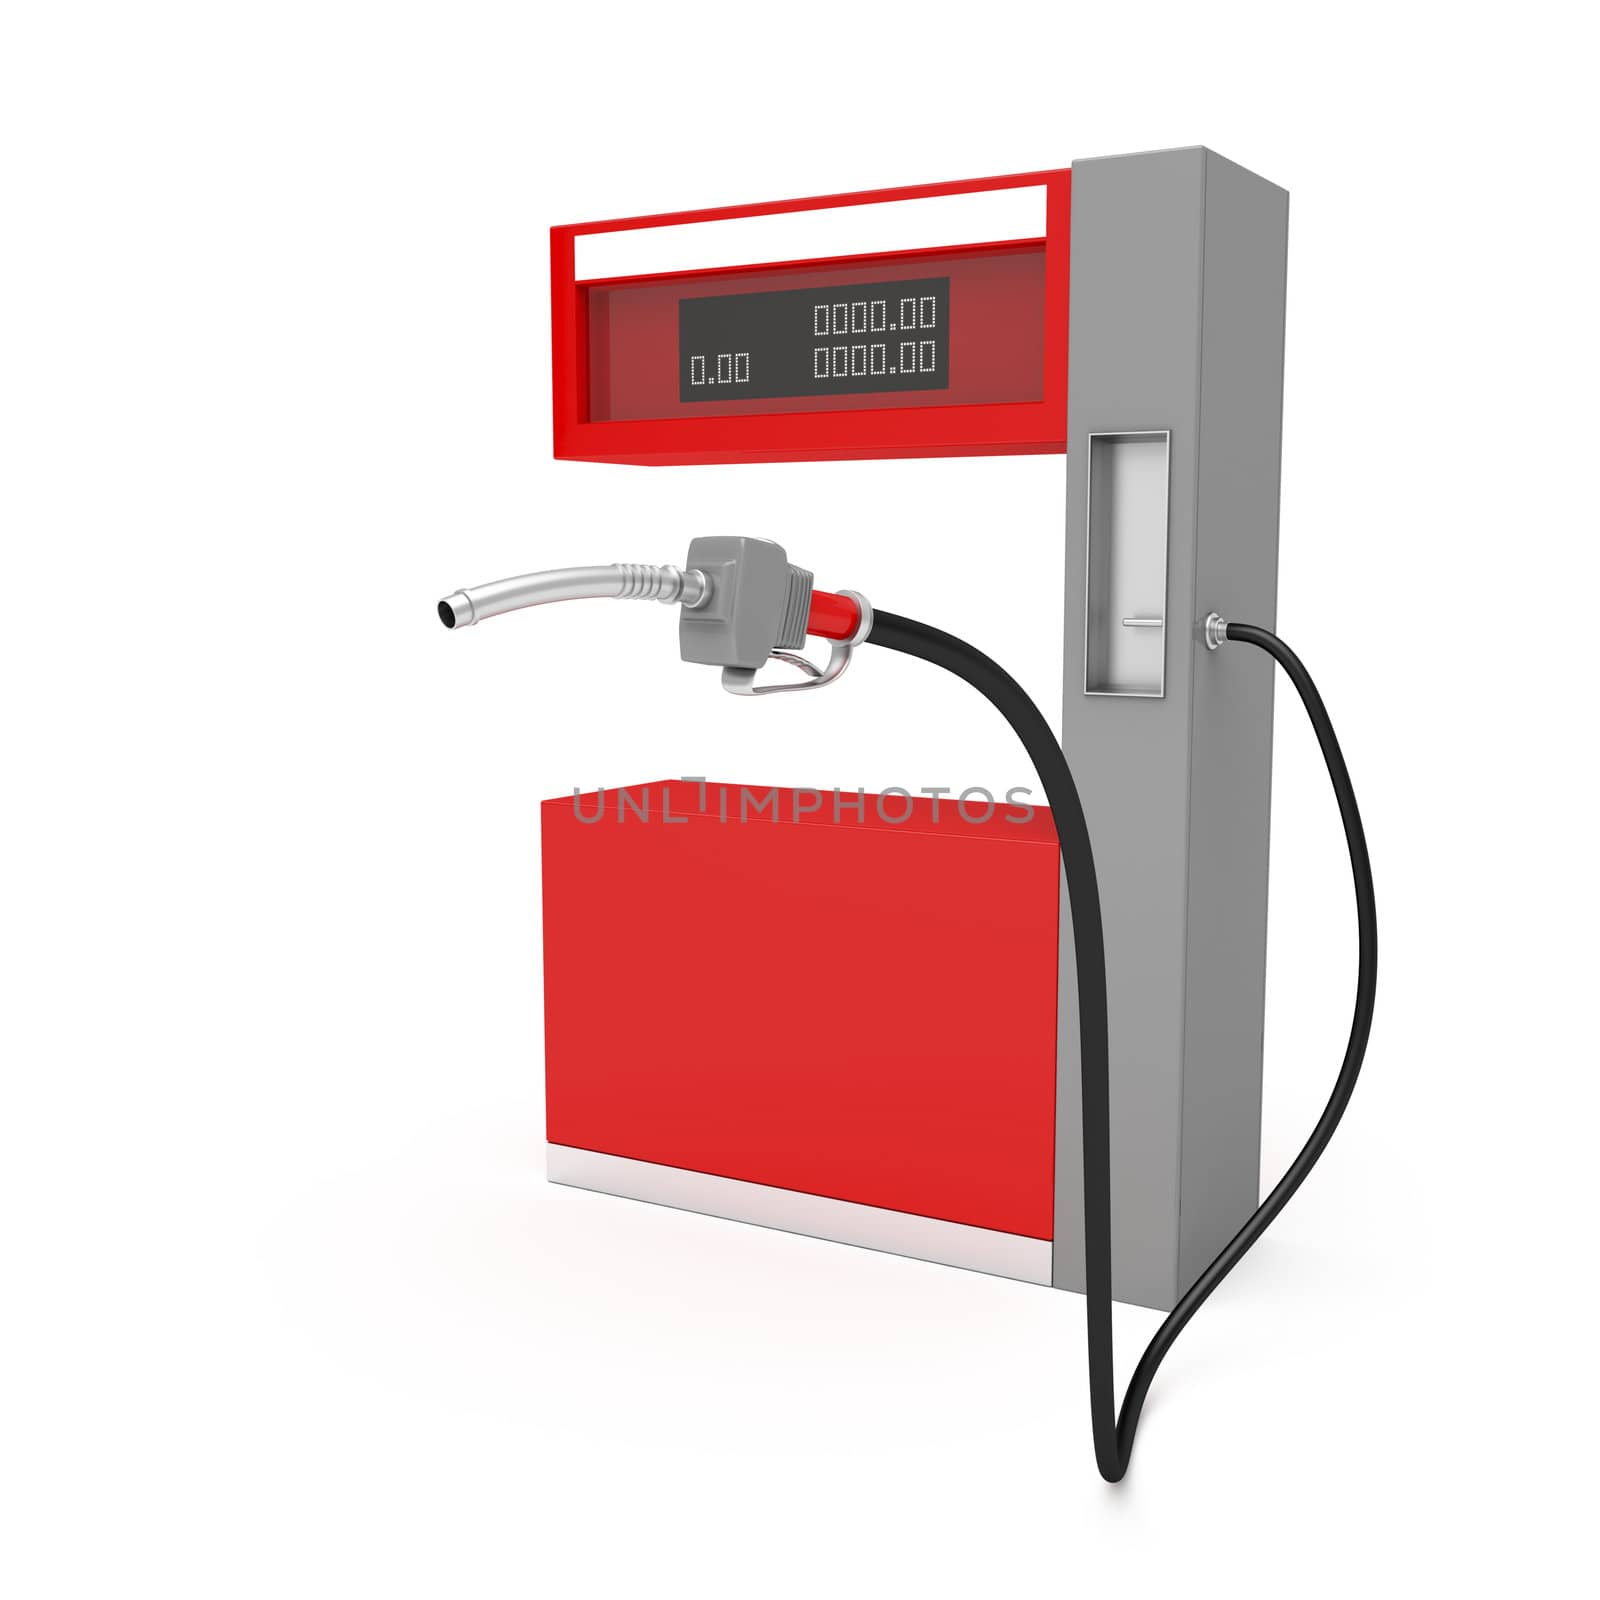 Fuel pump on white background by magraphics